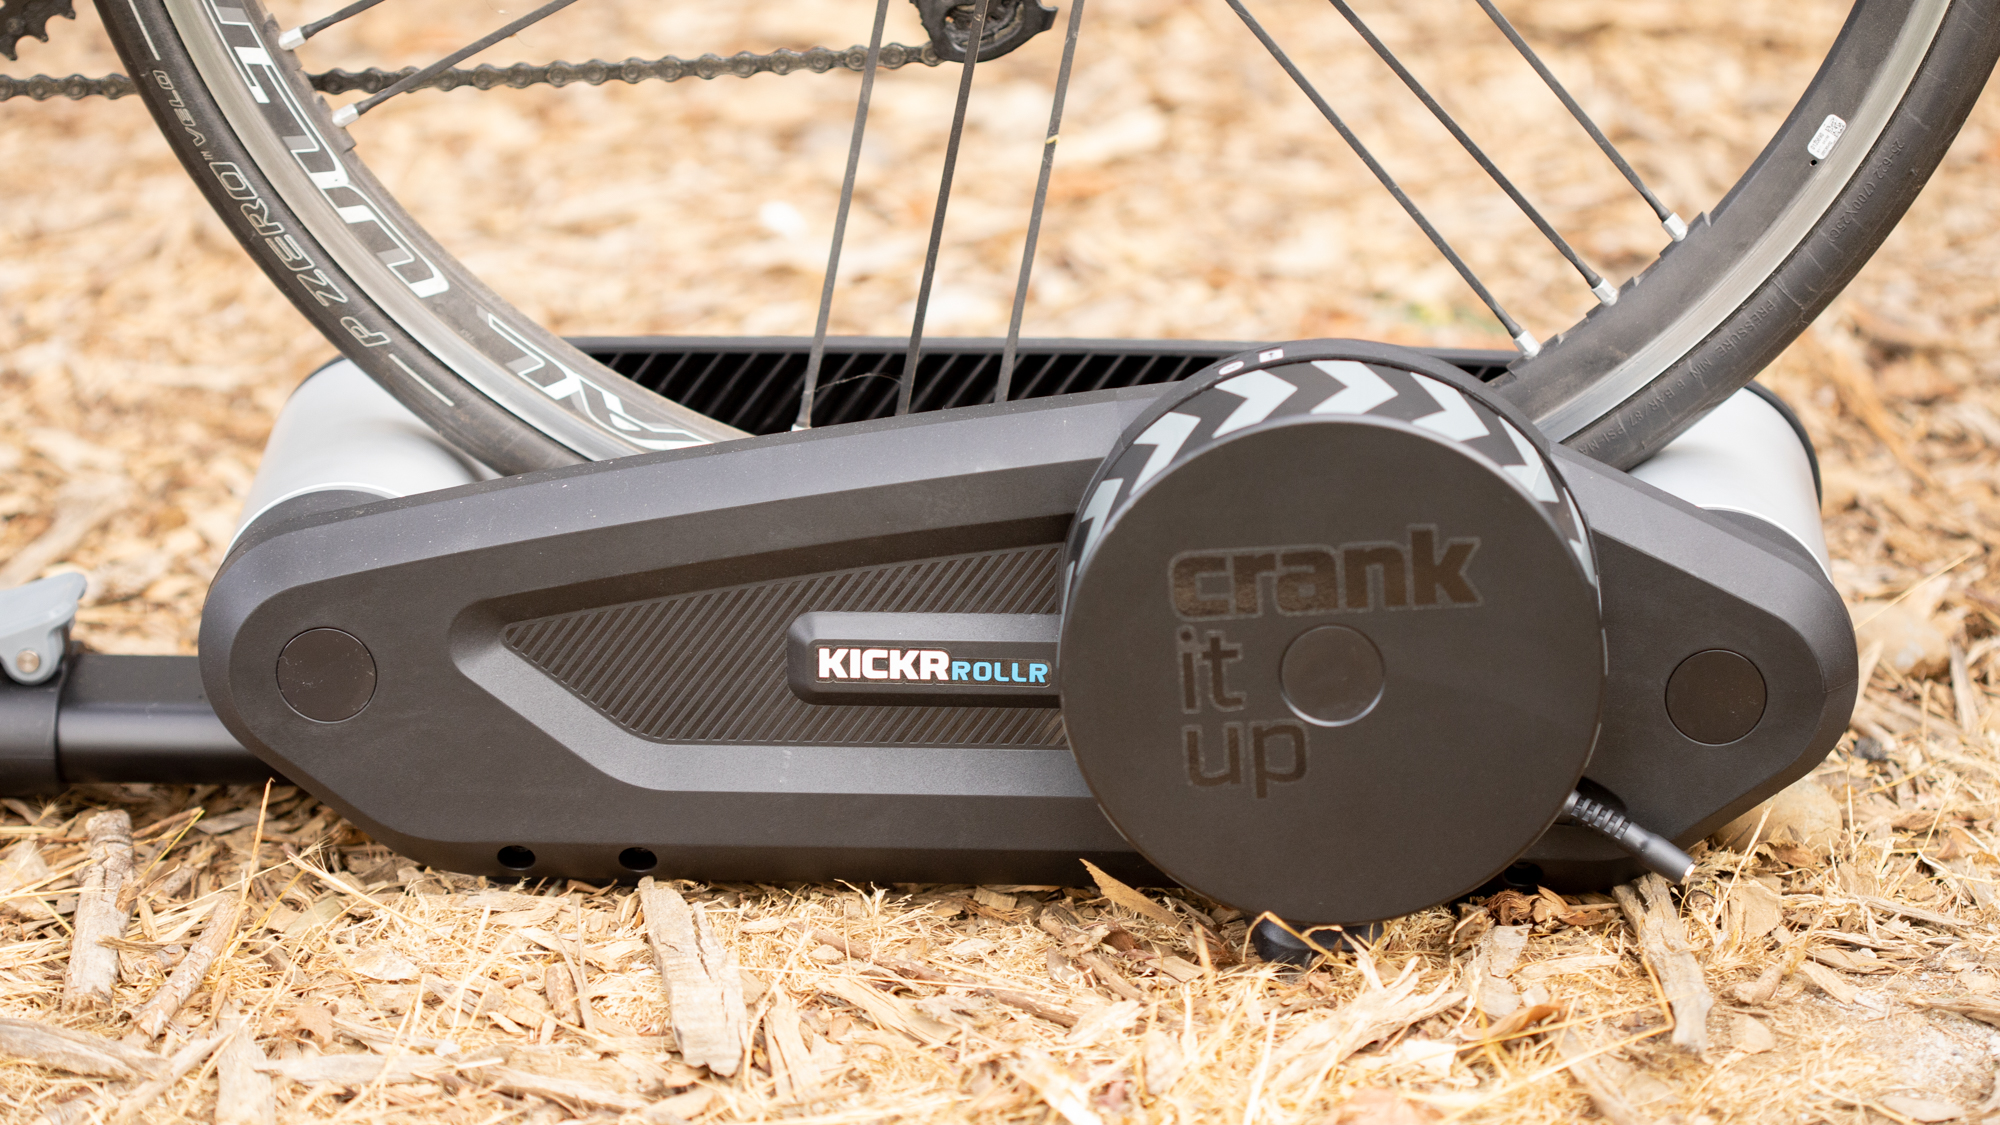 Wahoo Kickr Rollr review - Smart rollers that you won't fall off